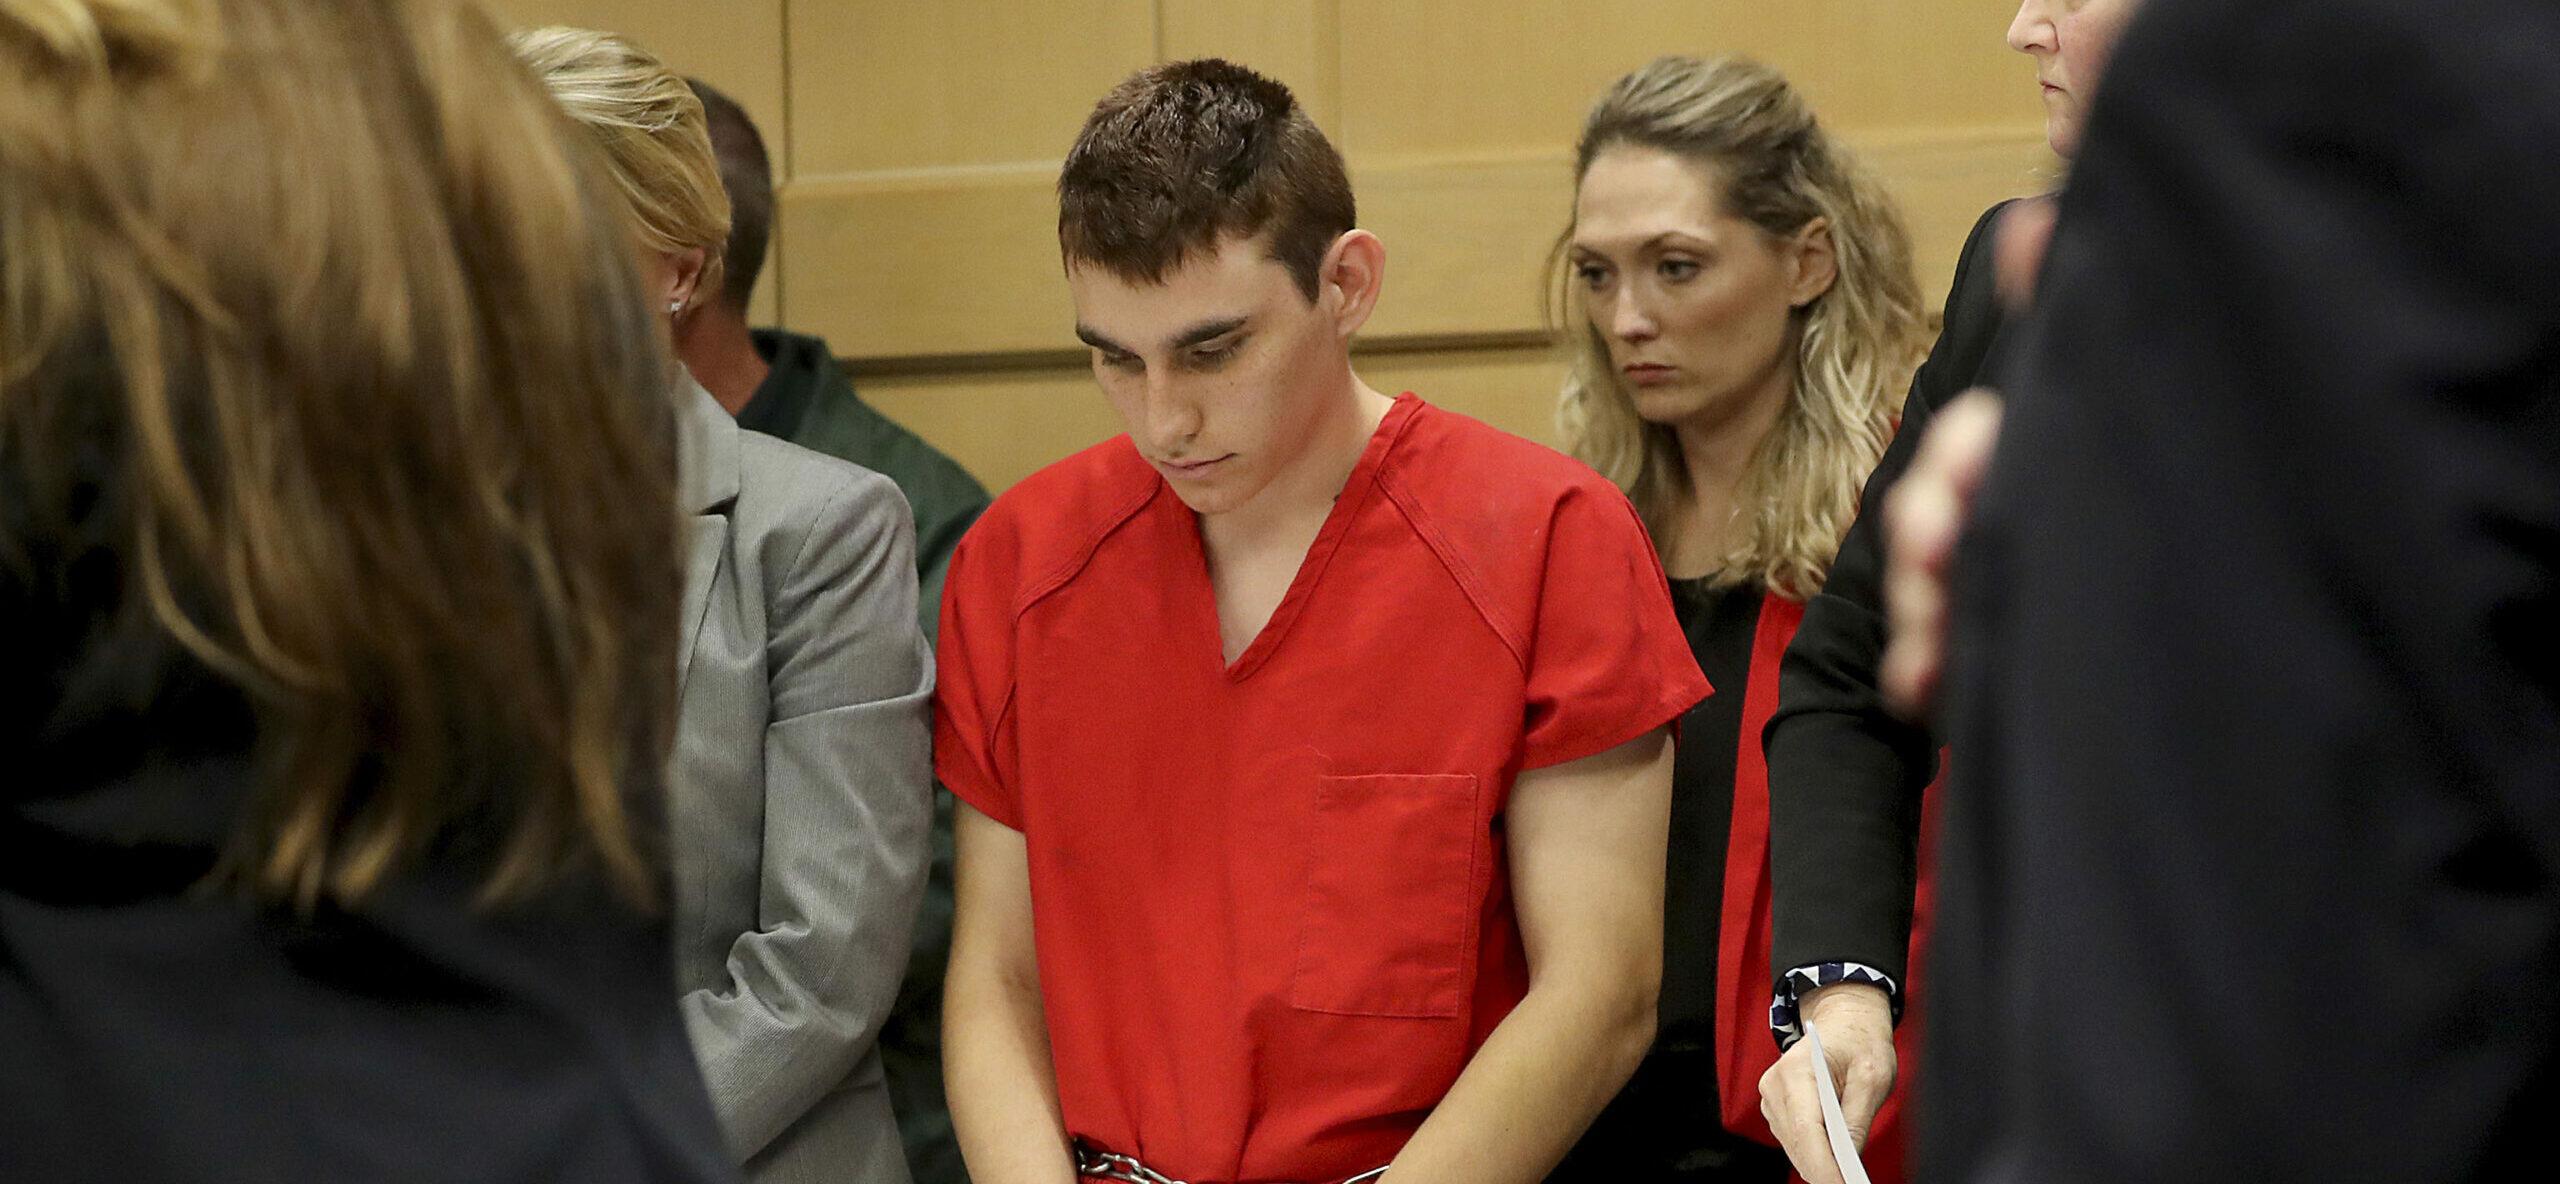 Nikolas Cruz Spared Death Penalty, Victim’s Family Members Are ‘Disgusted’